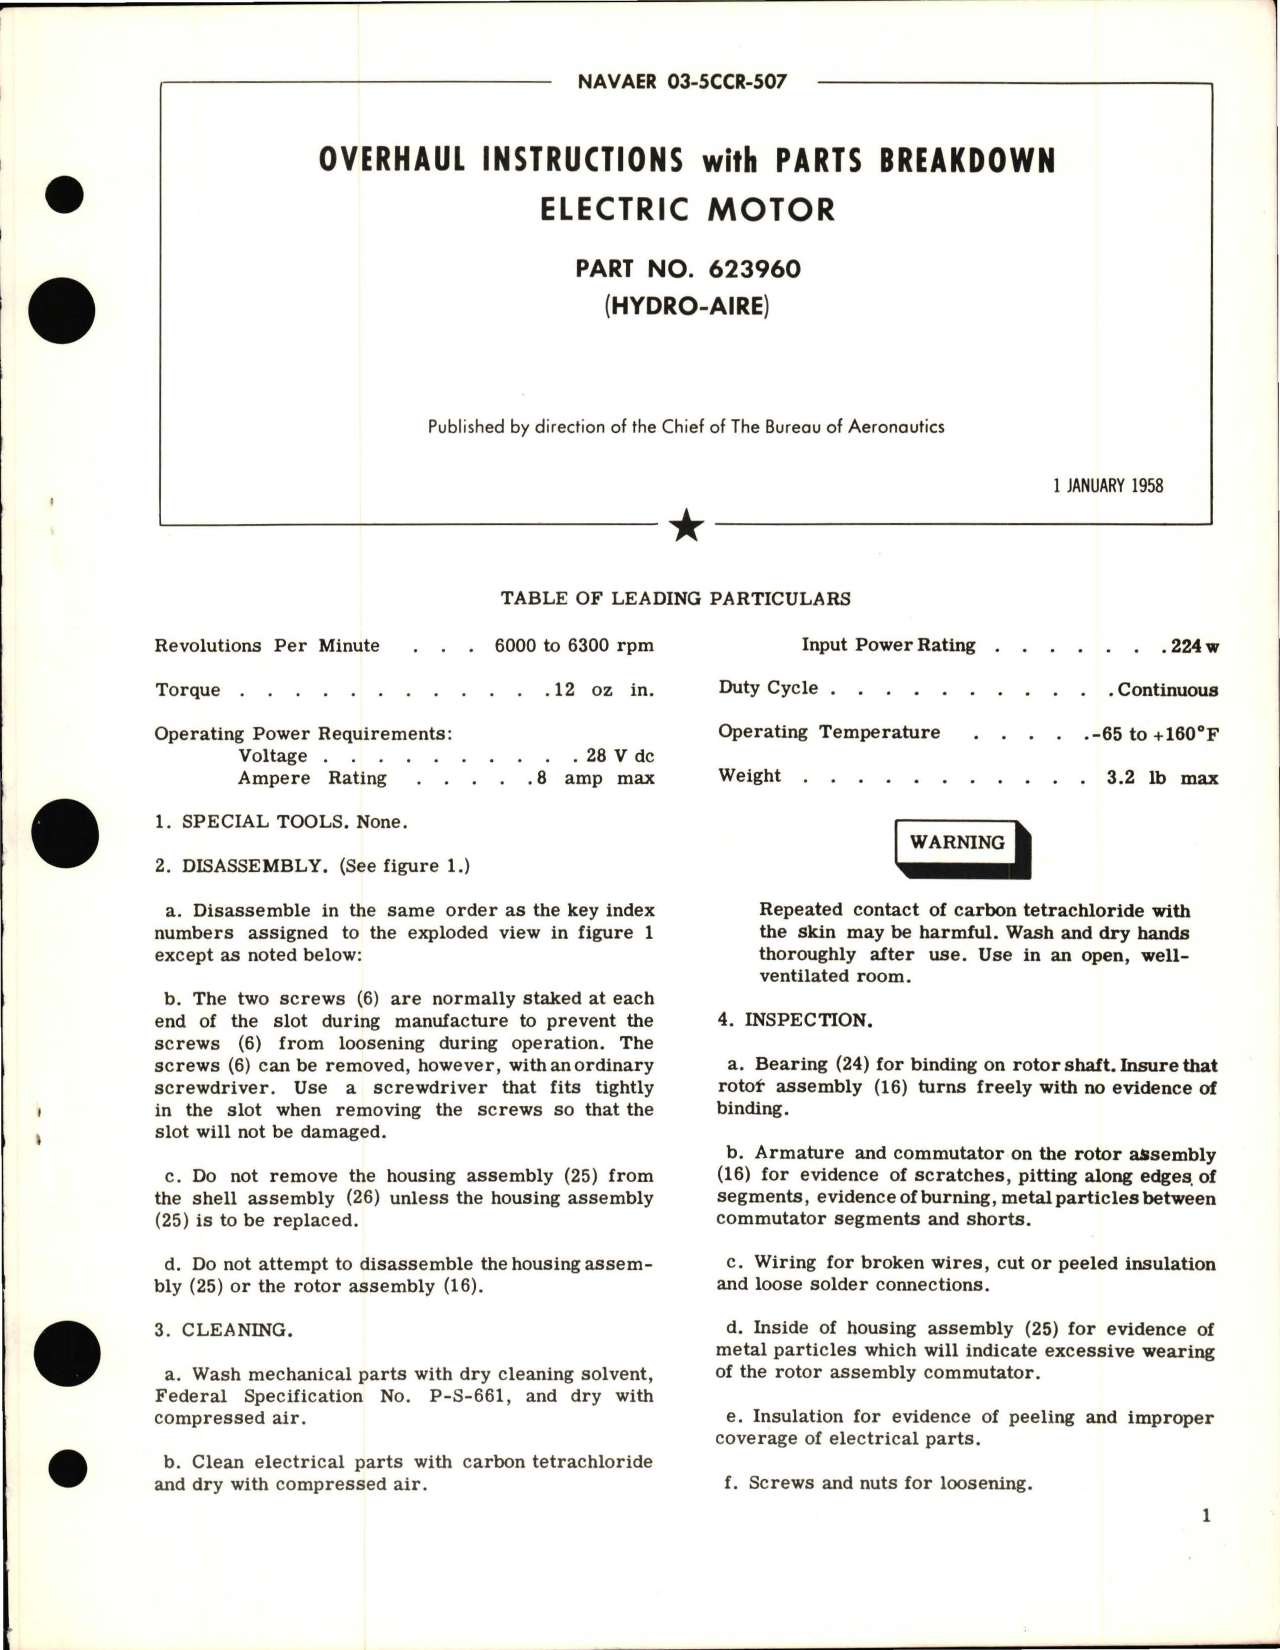 Sample page 1 from AirCorps Library document: Overhaul Instructions with Parts Breakdown for Electric Motor - Part 623960